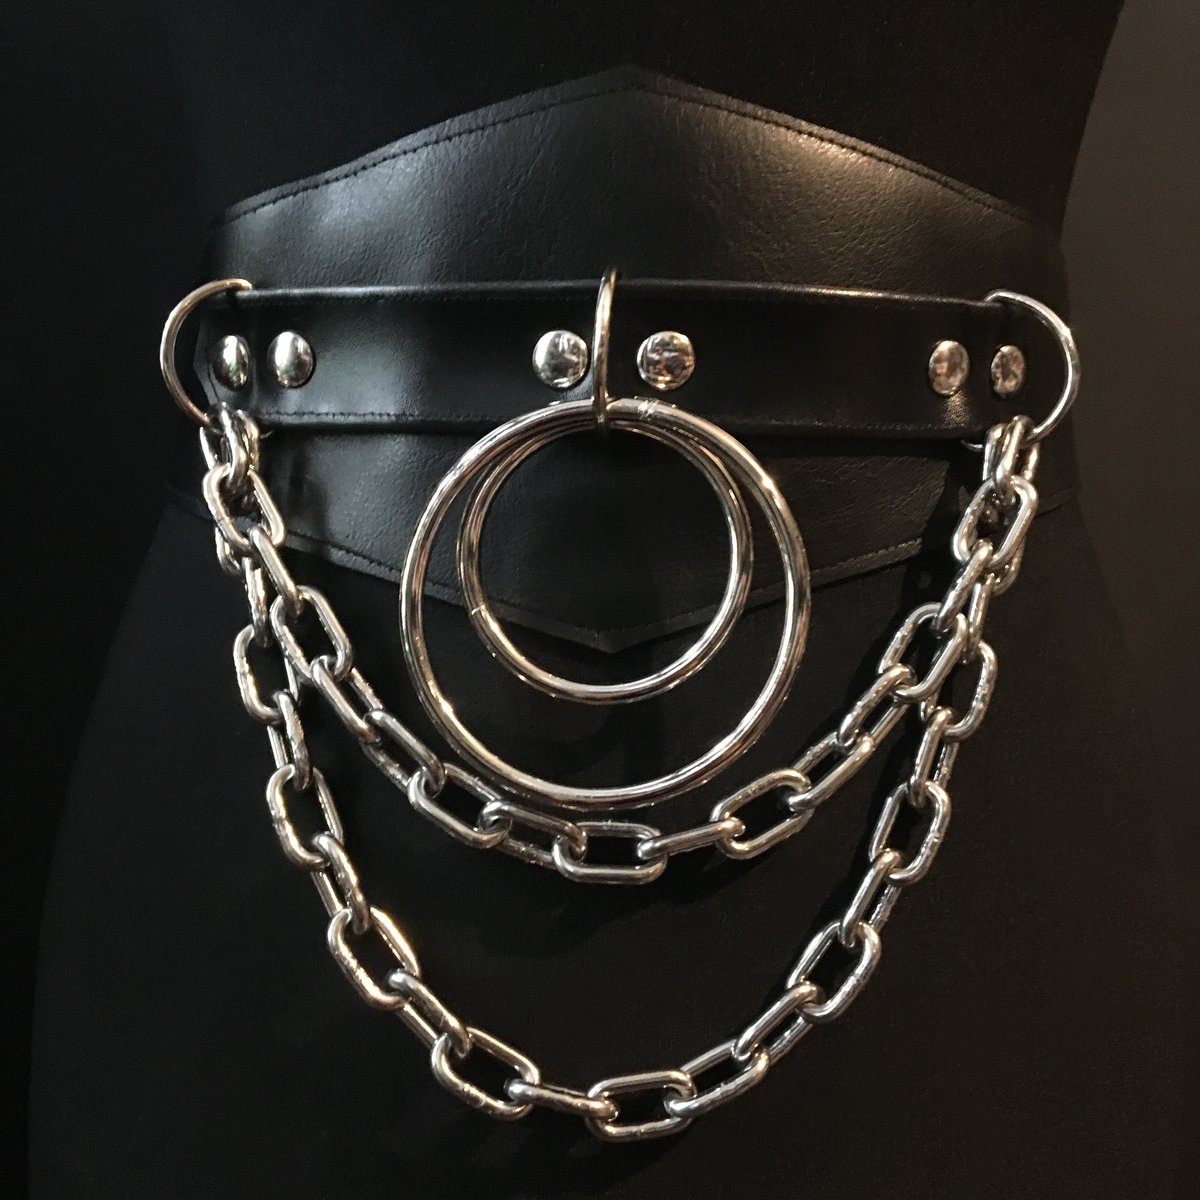 Double ring double chain cincher vegan leather